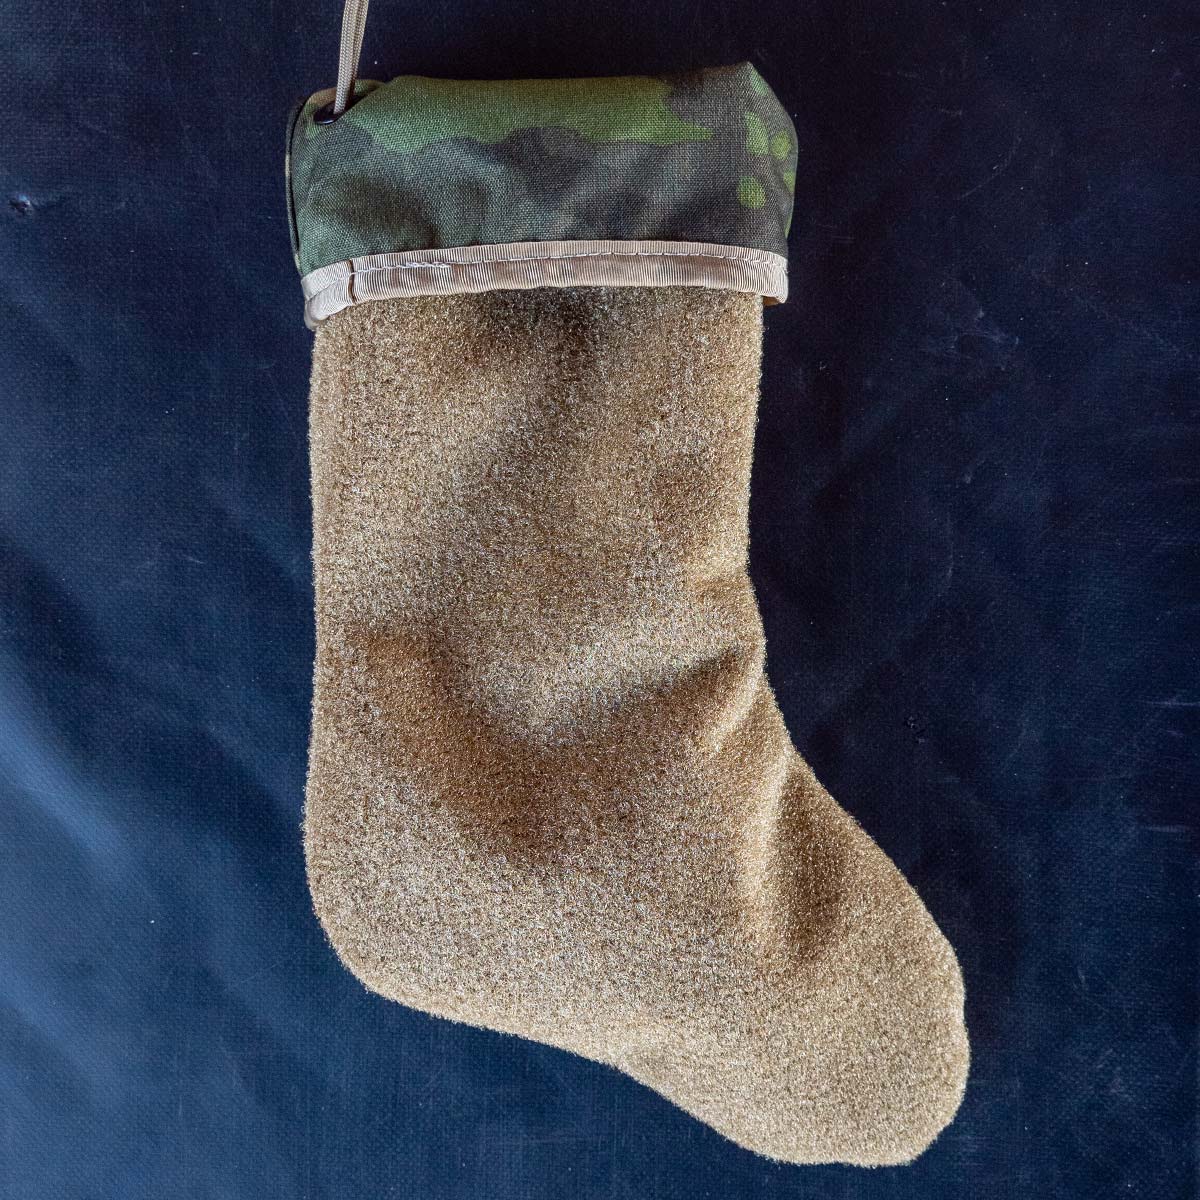 X-Mas Stocking - Built by SCARS